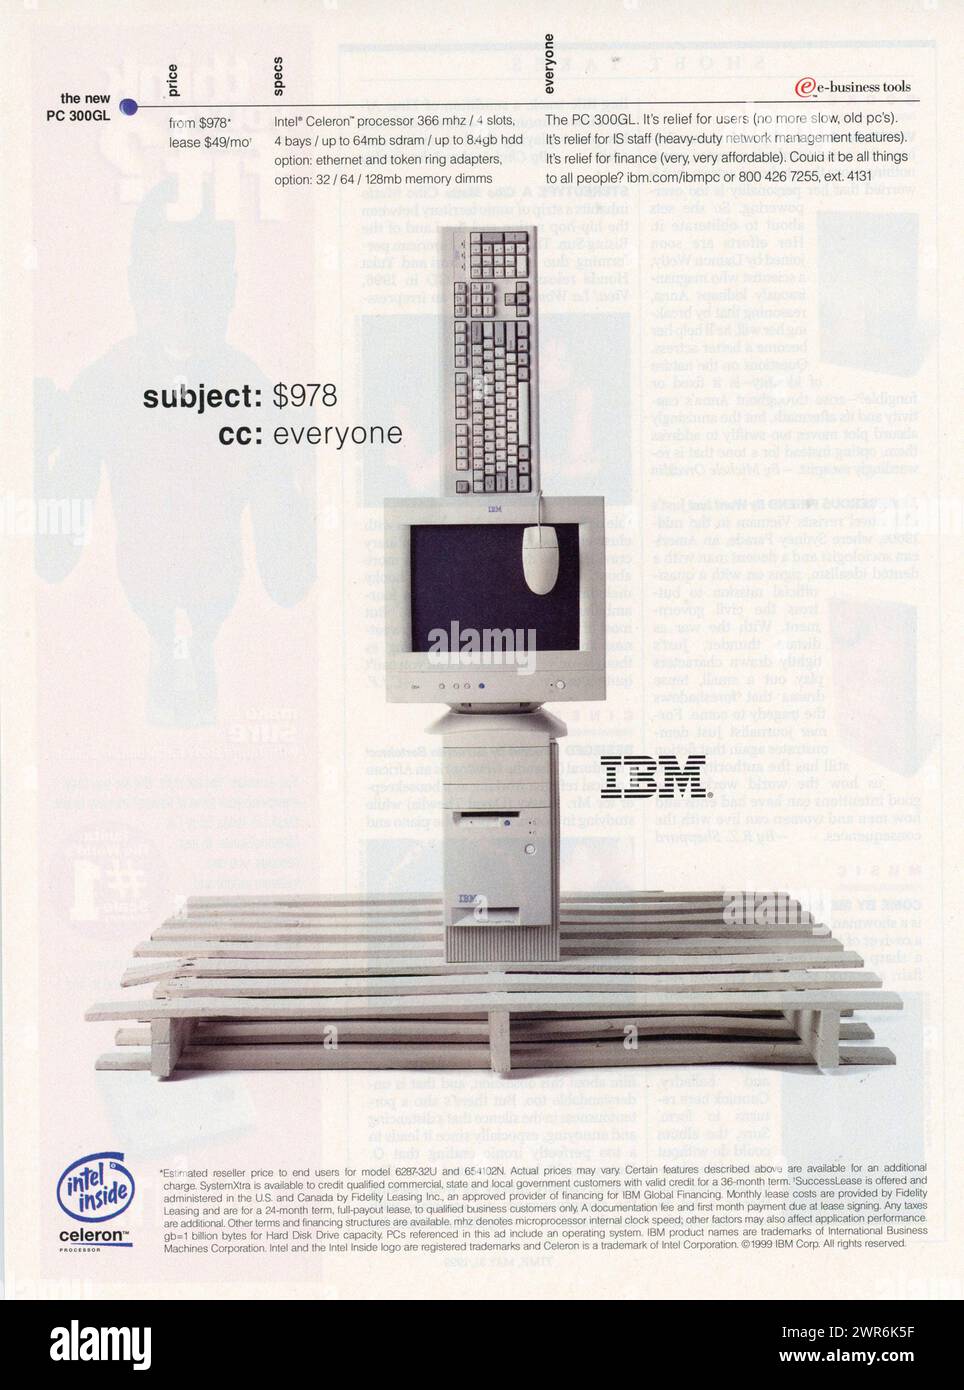 Vintage 'Time' magazine 31 May 1999 issue advert, USA Stock Photo